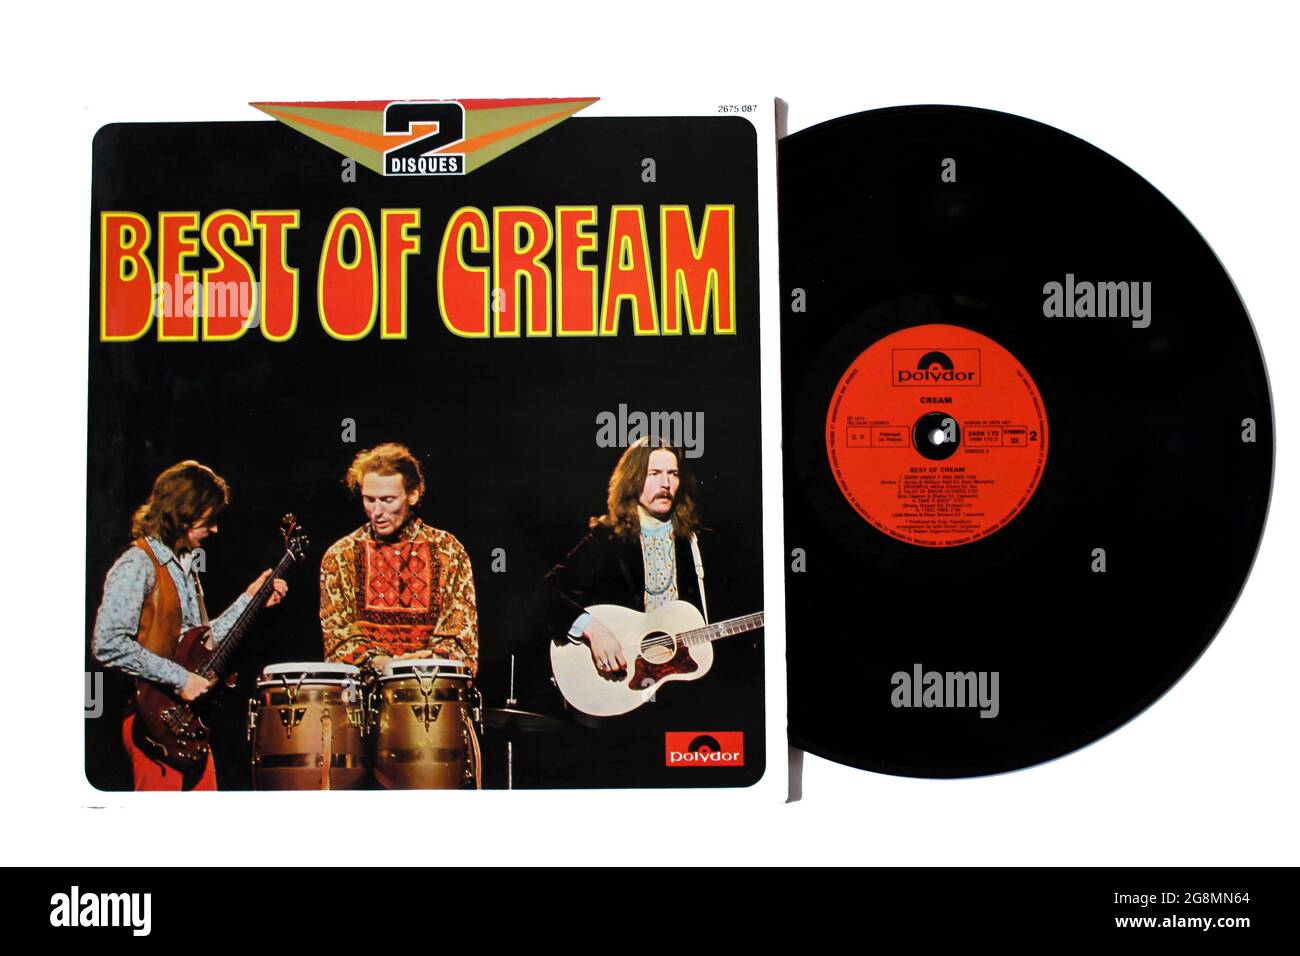 Psychedelic, blues and hard rock band, Cream music album on vinyl record LP disc. Titled: Best of Cream album cover Stock Photo